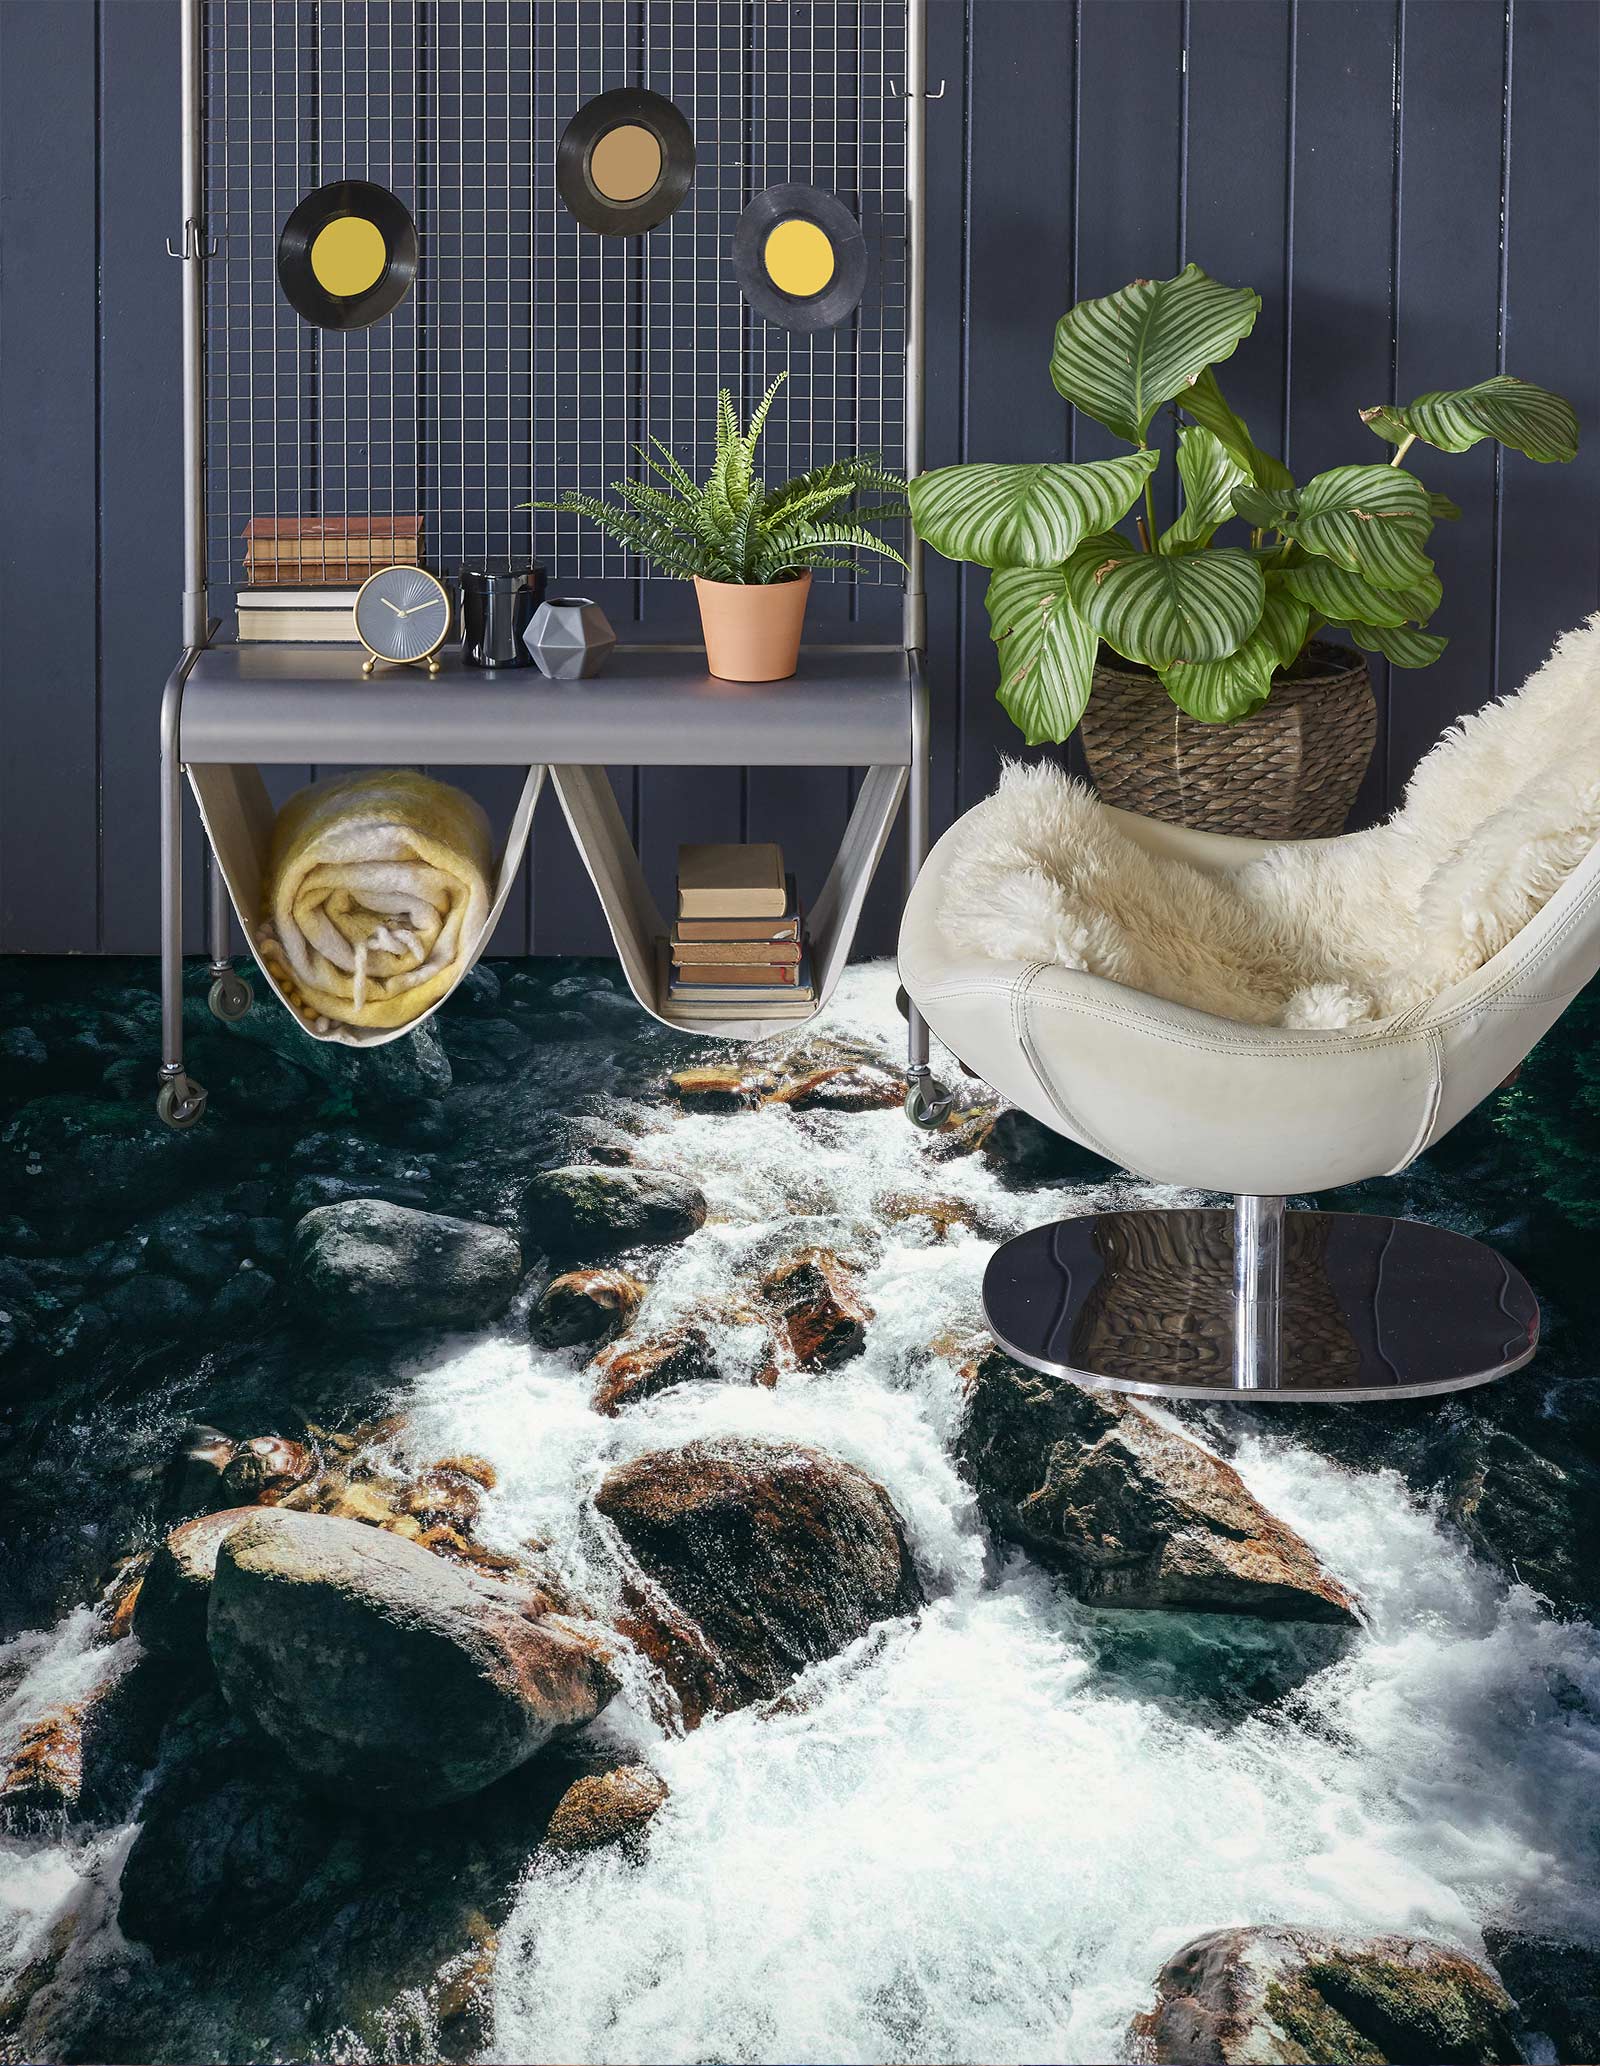 3D The Flowing Water Of Hope 1078 Floor Mural  Wallpaper Murals Self-Adhesive Removable Print Epoxy